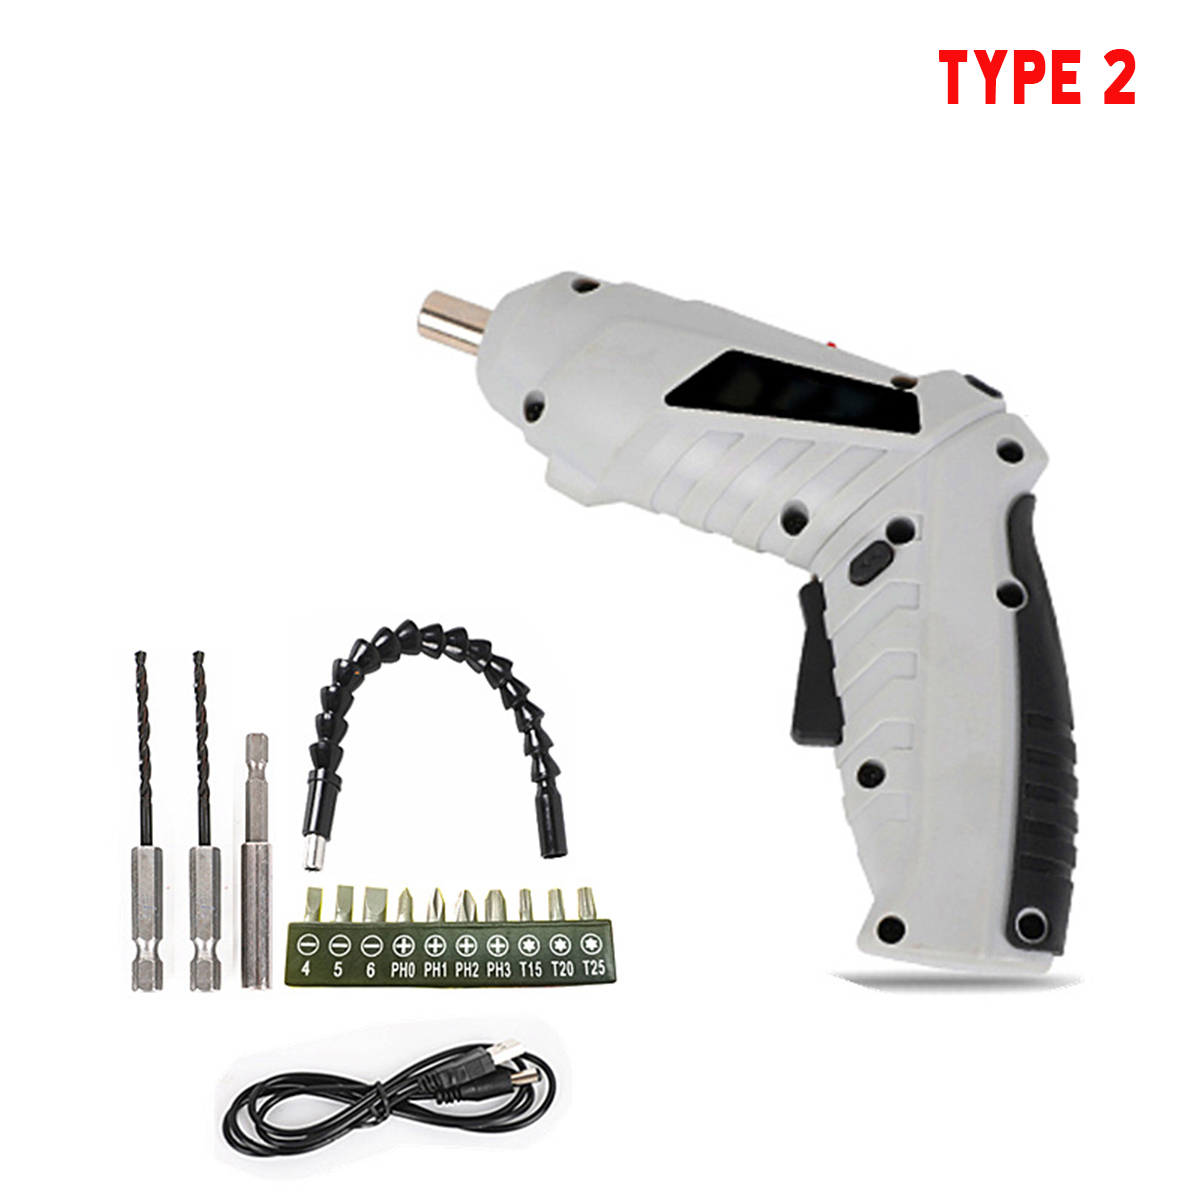 Mini Cordless Electric Screwdriver Set USB Rechargeable Drill Driver With Work Light 18